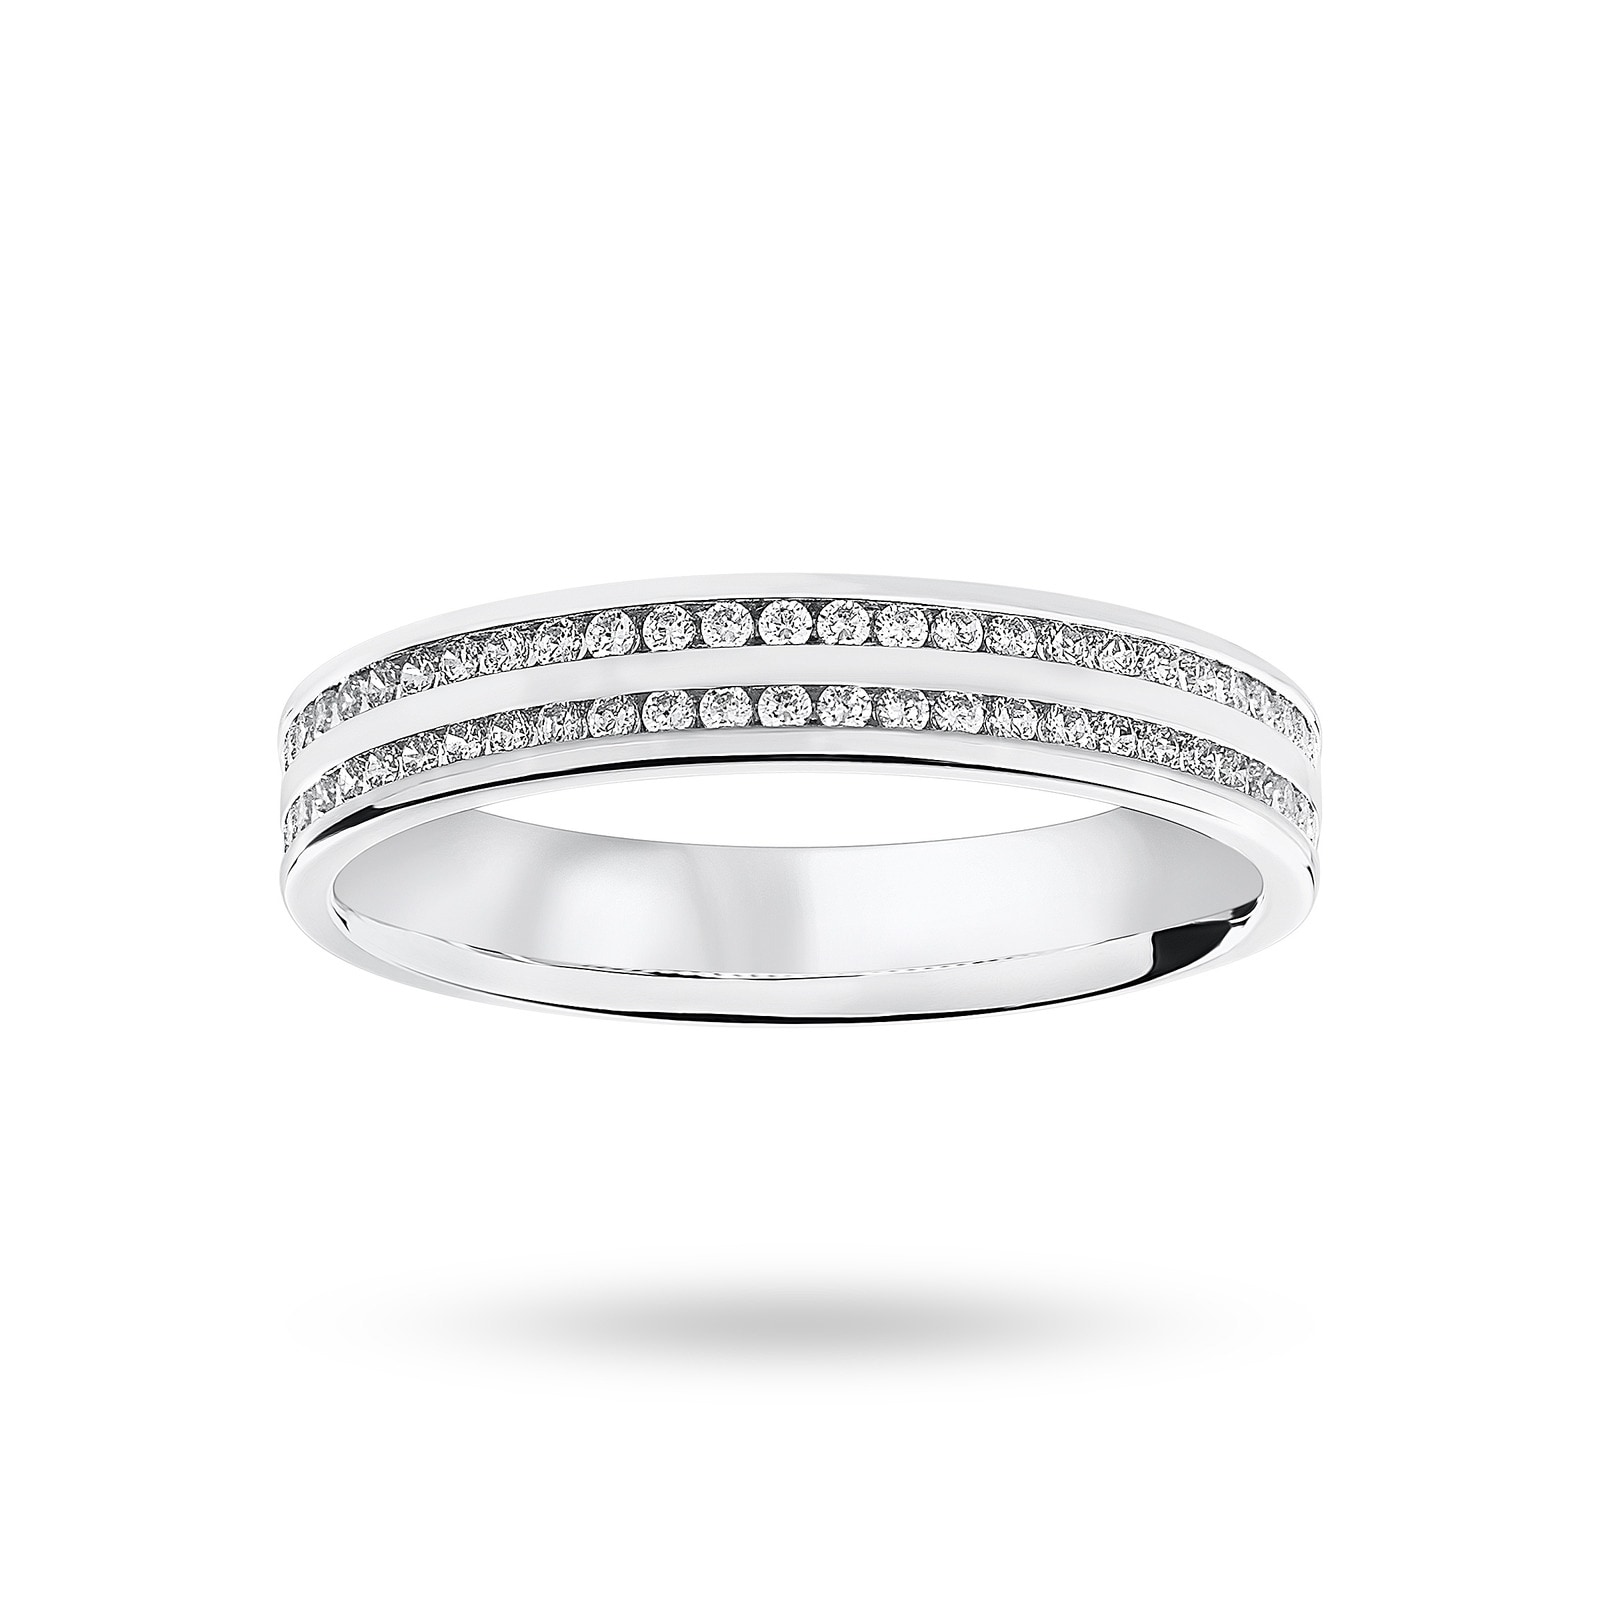 18 Carat White Gold 0.28 Carat Brilliant Cut 2 Row Channel Set Half Eternity Ring - Ring Size O